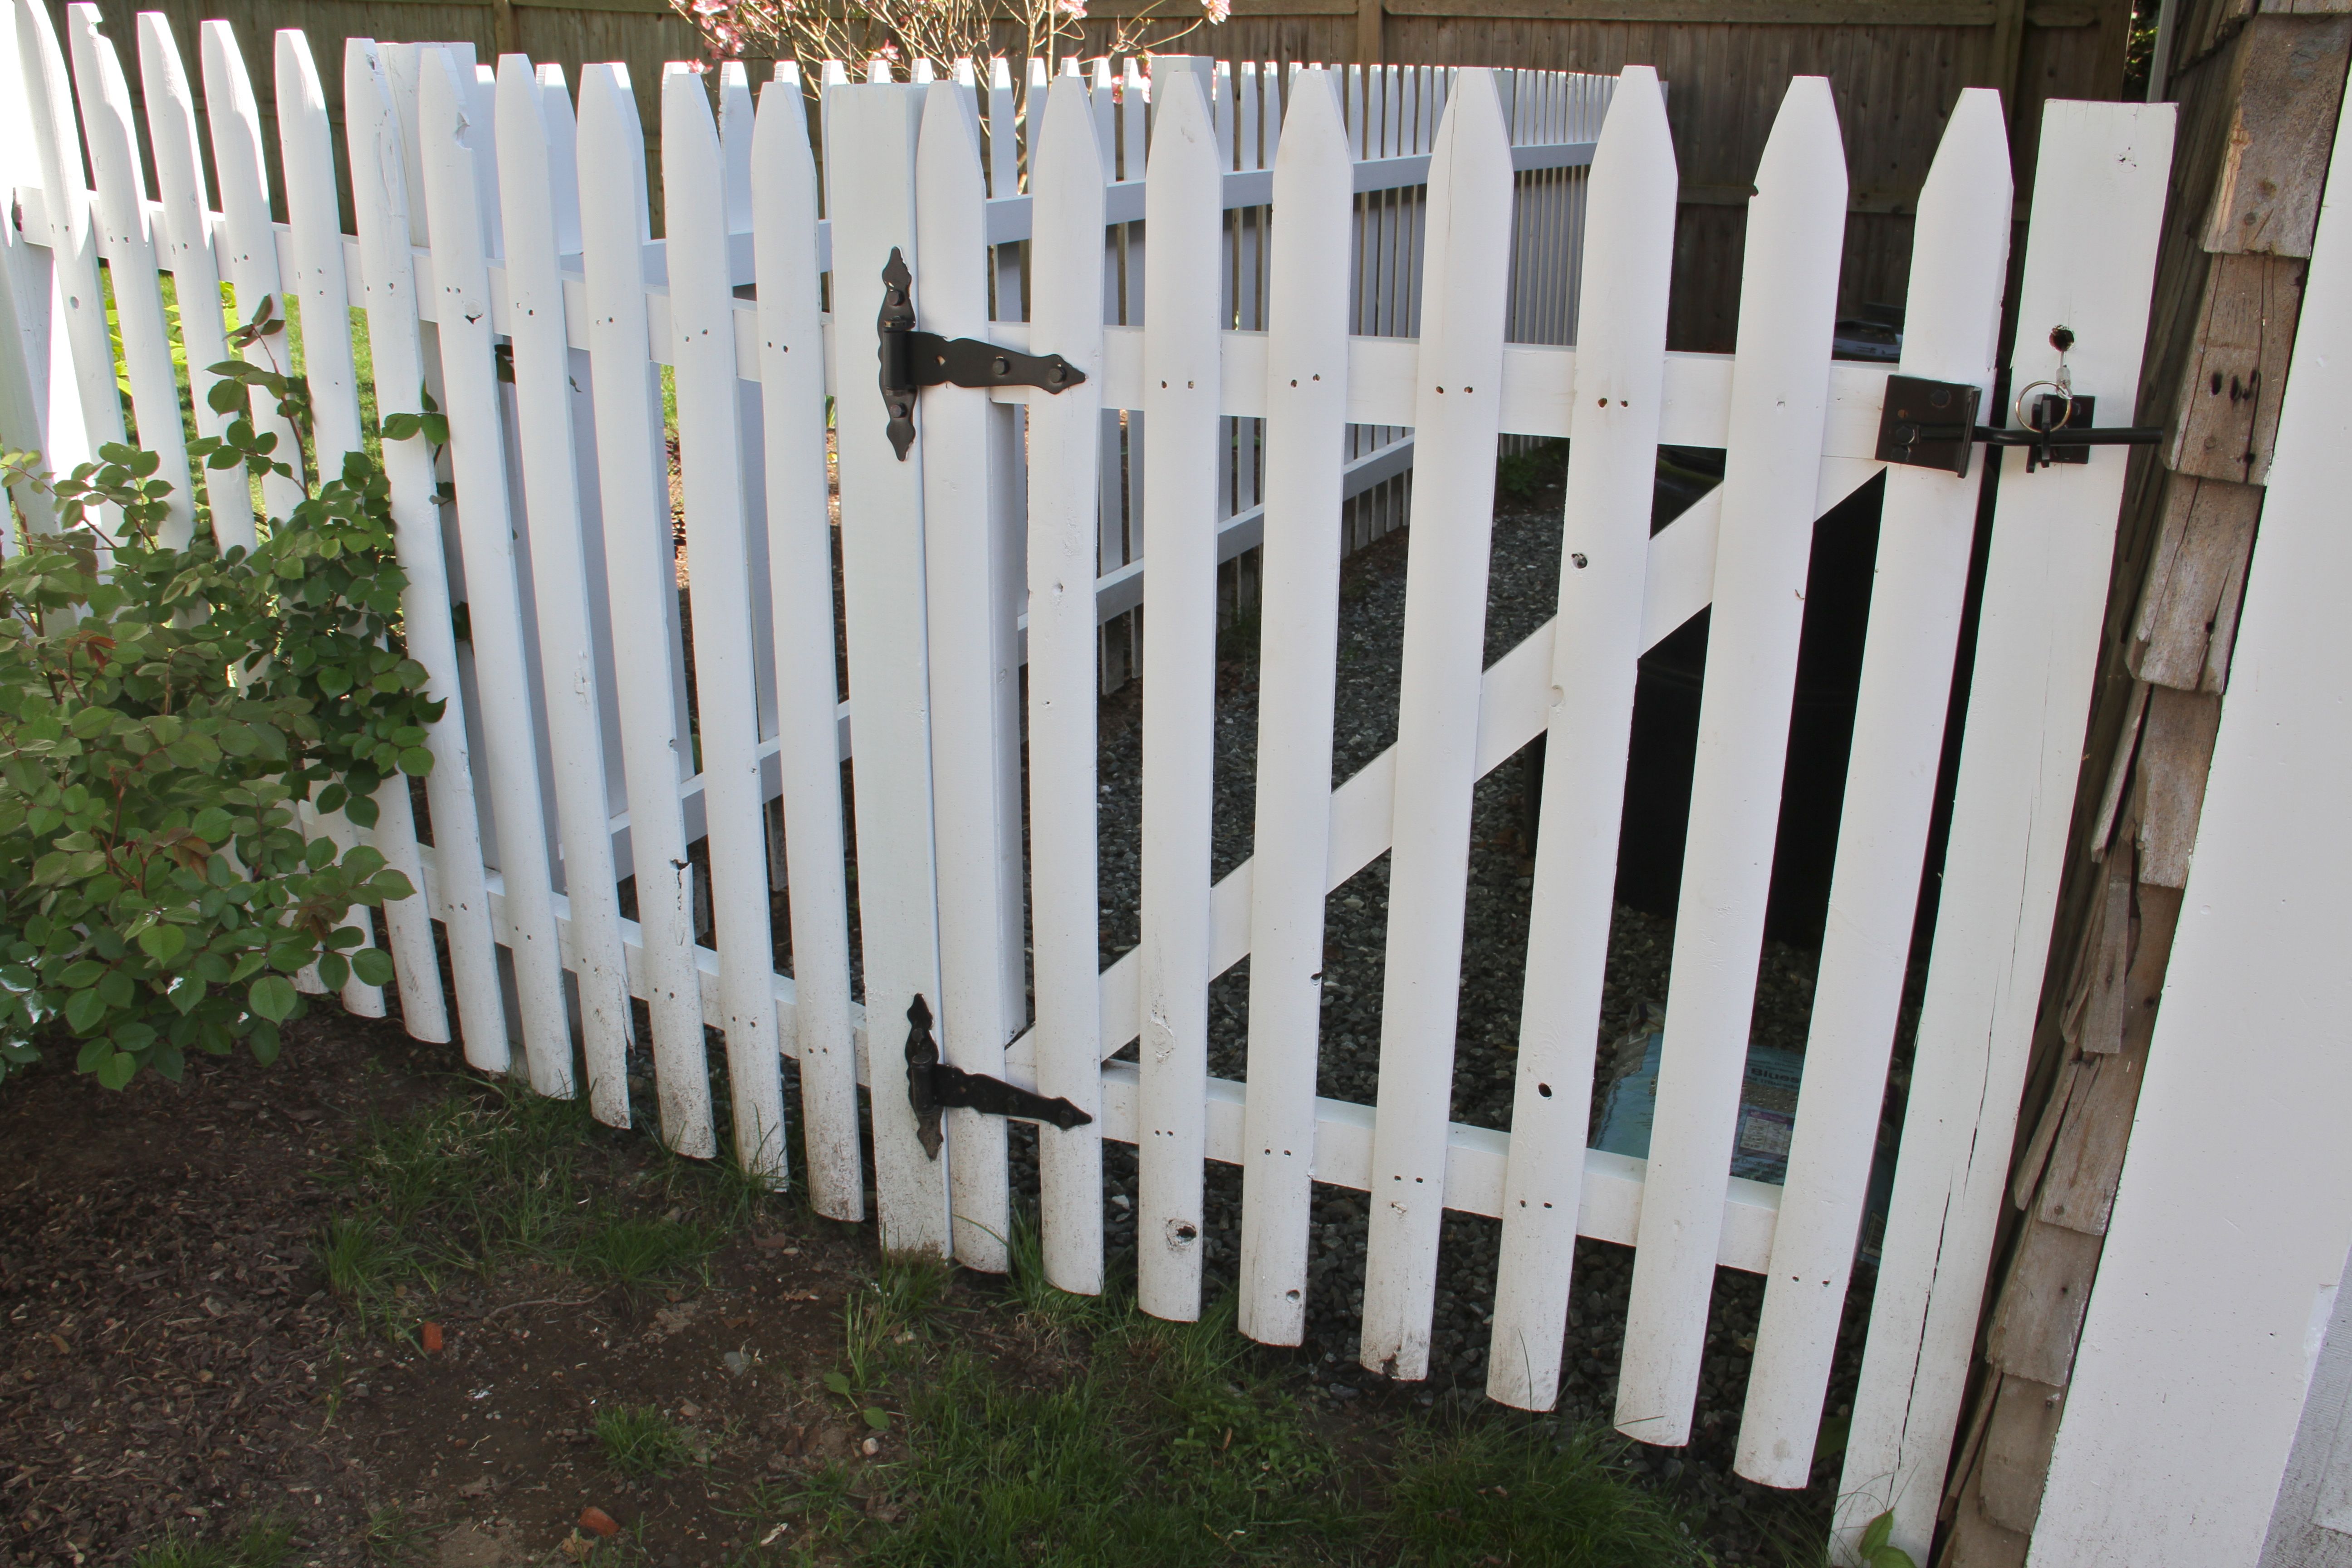 AFTER: Plain white on the fencing gives a crisp tie-in to the white trim throughout the entire house. Plus, if you have a picket fence, and you live in New England, why not make it a classic 'white picket fence'?